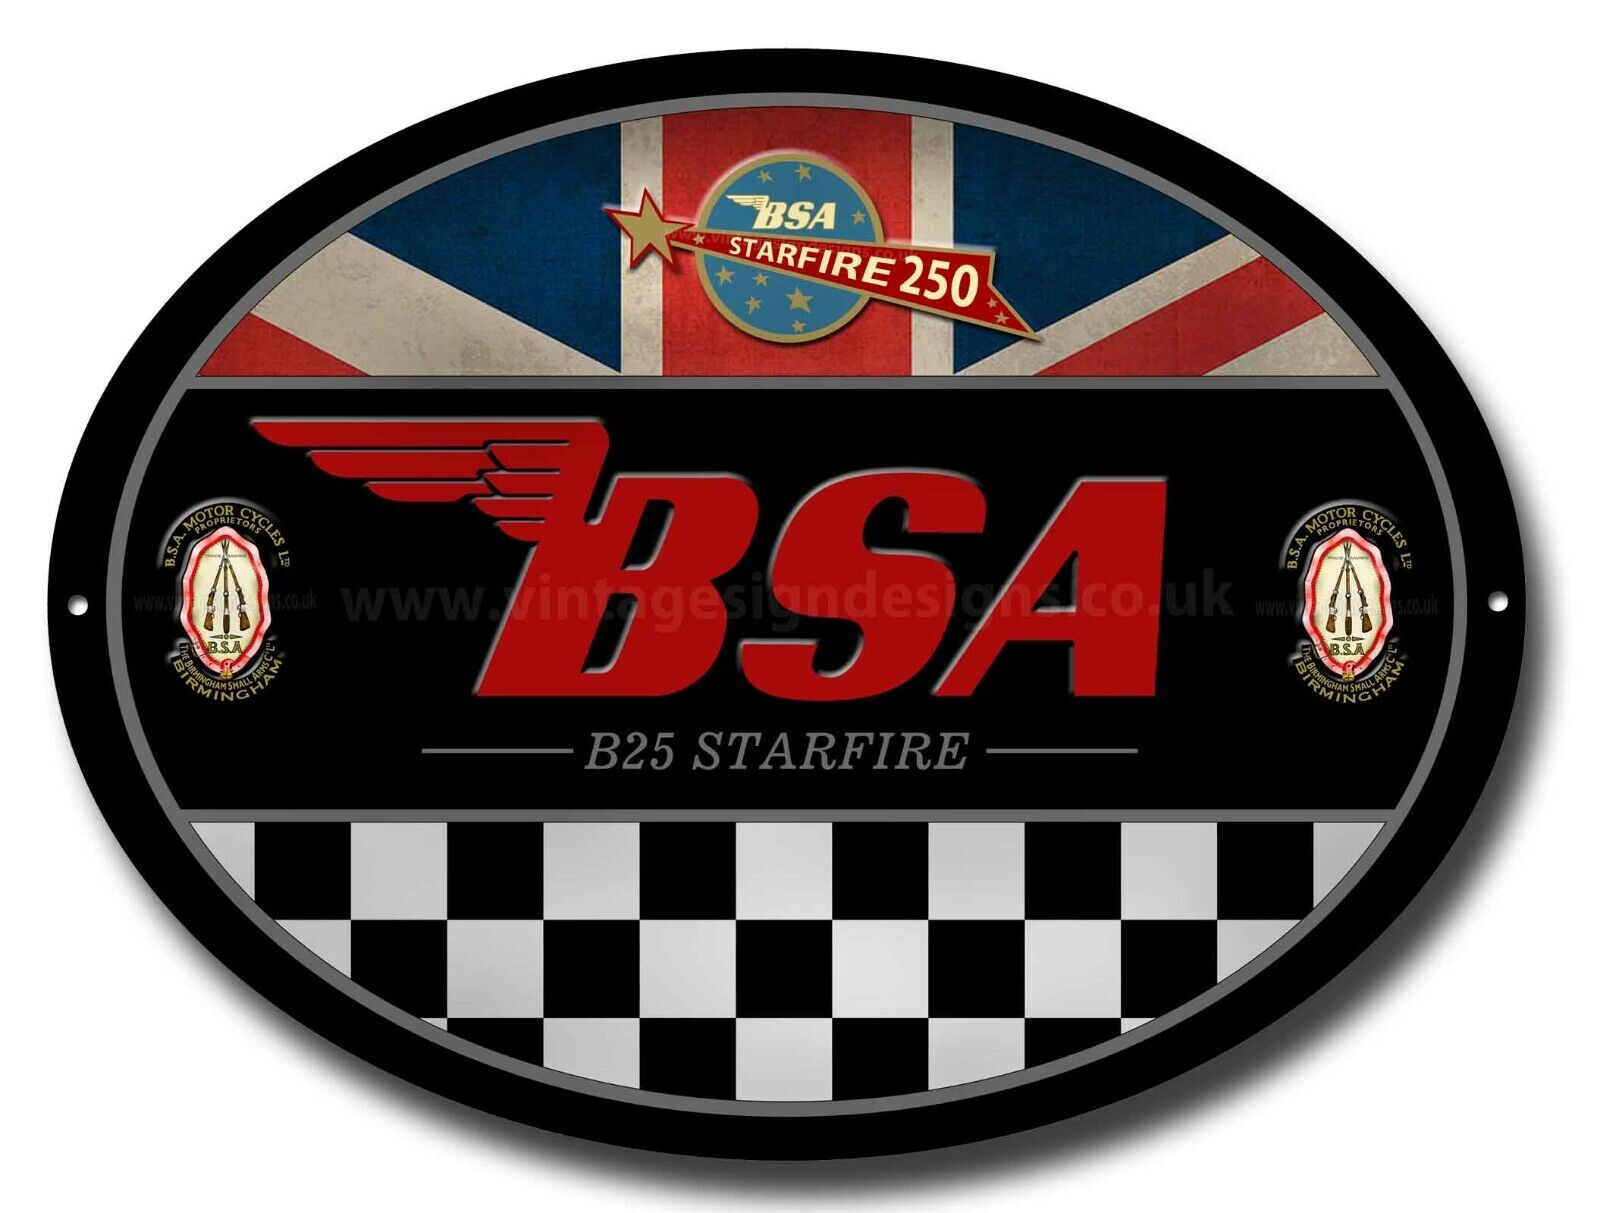 BSA B25 STARFIRE OVAL METAL SIGN.OFFICIALLY LICENSED B.S.A PRODUCT. © &™ BSA